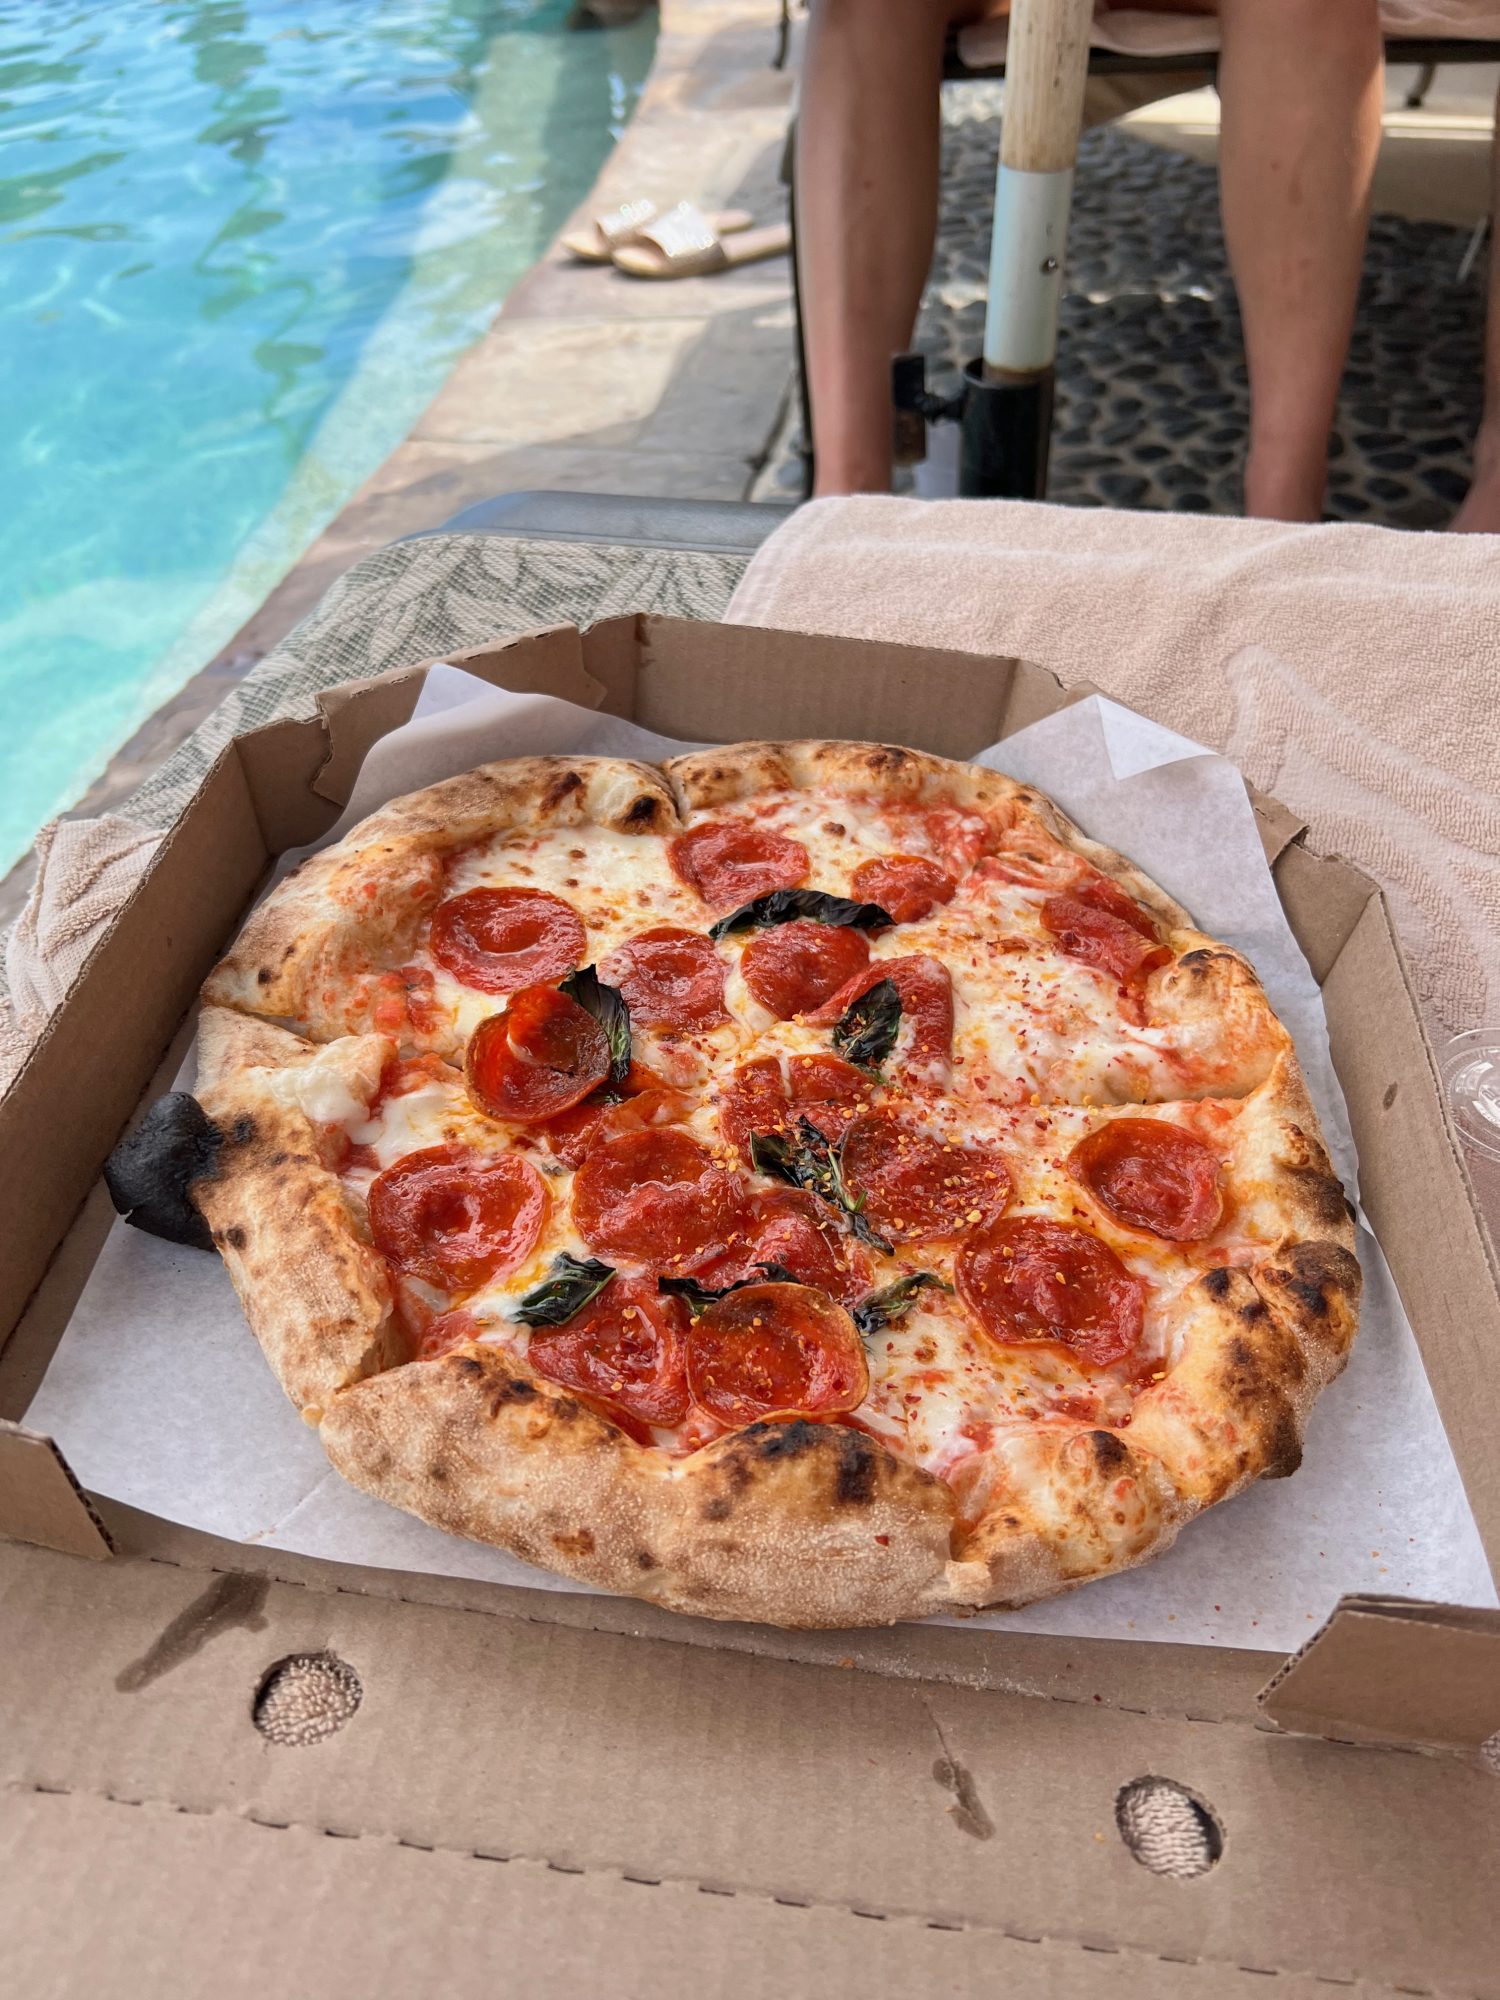 Tabasco's pizza in a brown box on a lawn chair next to the pool.